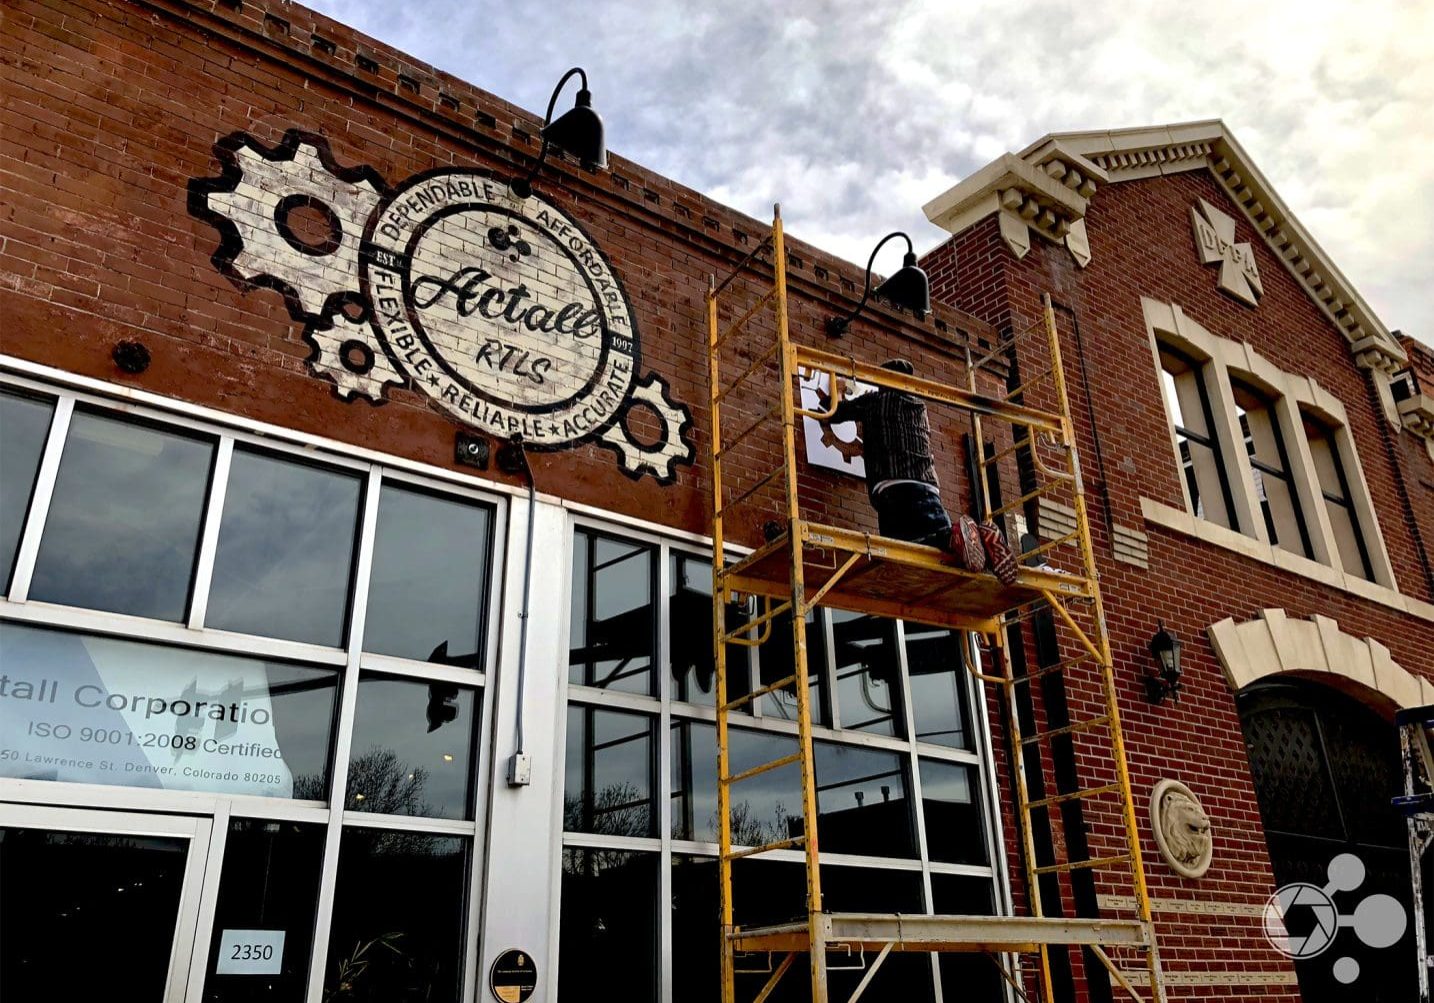 April | 25 | 2018
Hand-painted signage for our new building